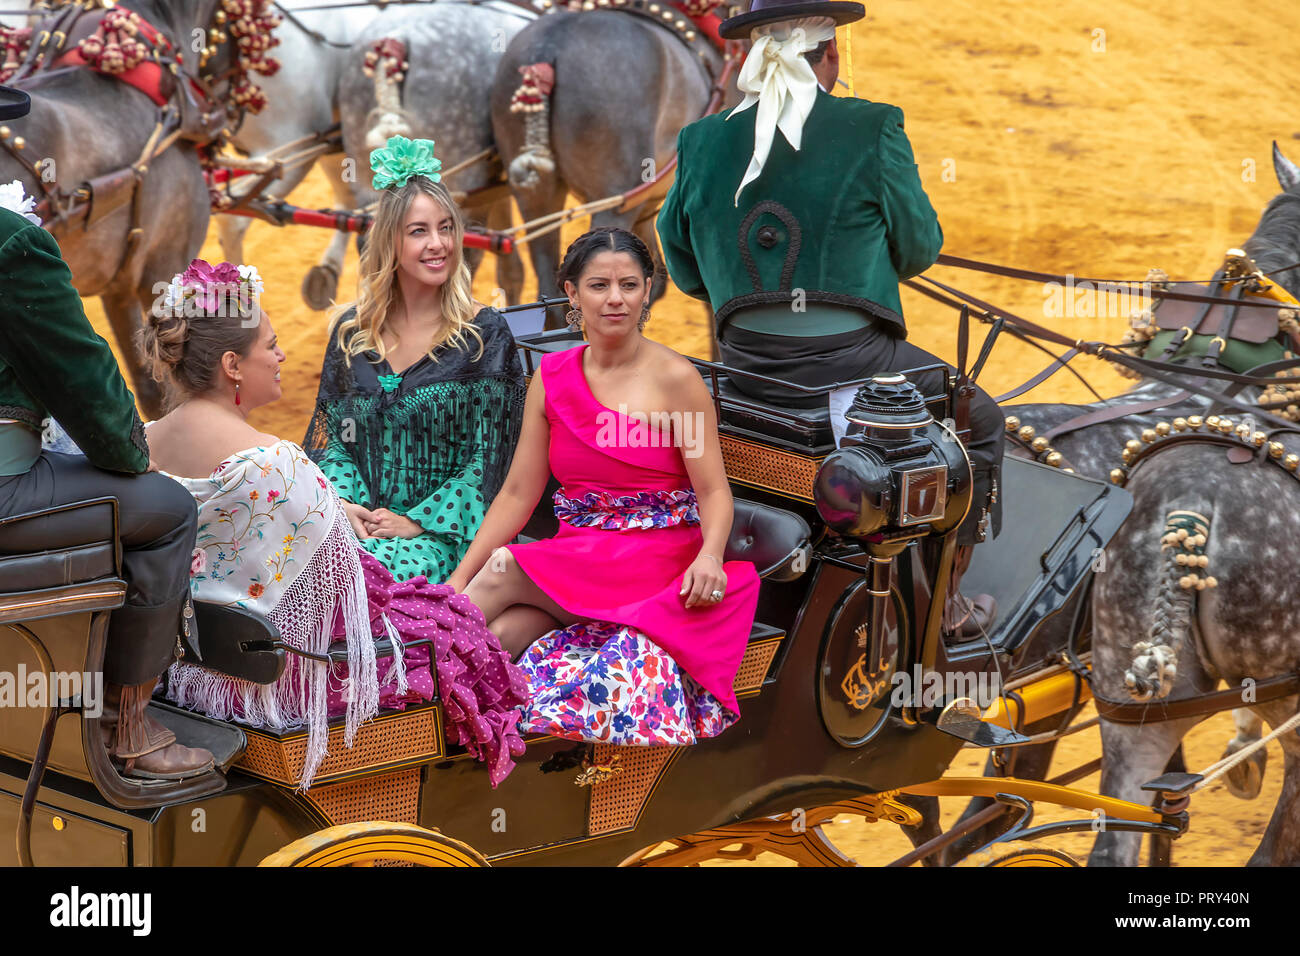 Seville, Spain - April  15, 2018: Young Women wearing traditional Sevillana dresses or flamenca dresses in a Horse drawn carriage in Seville April Fai Stock Photo